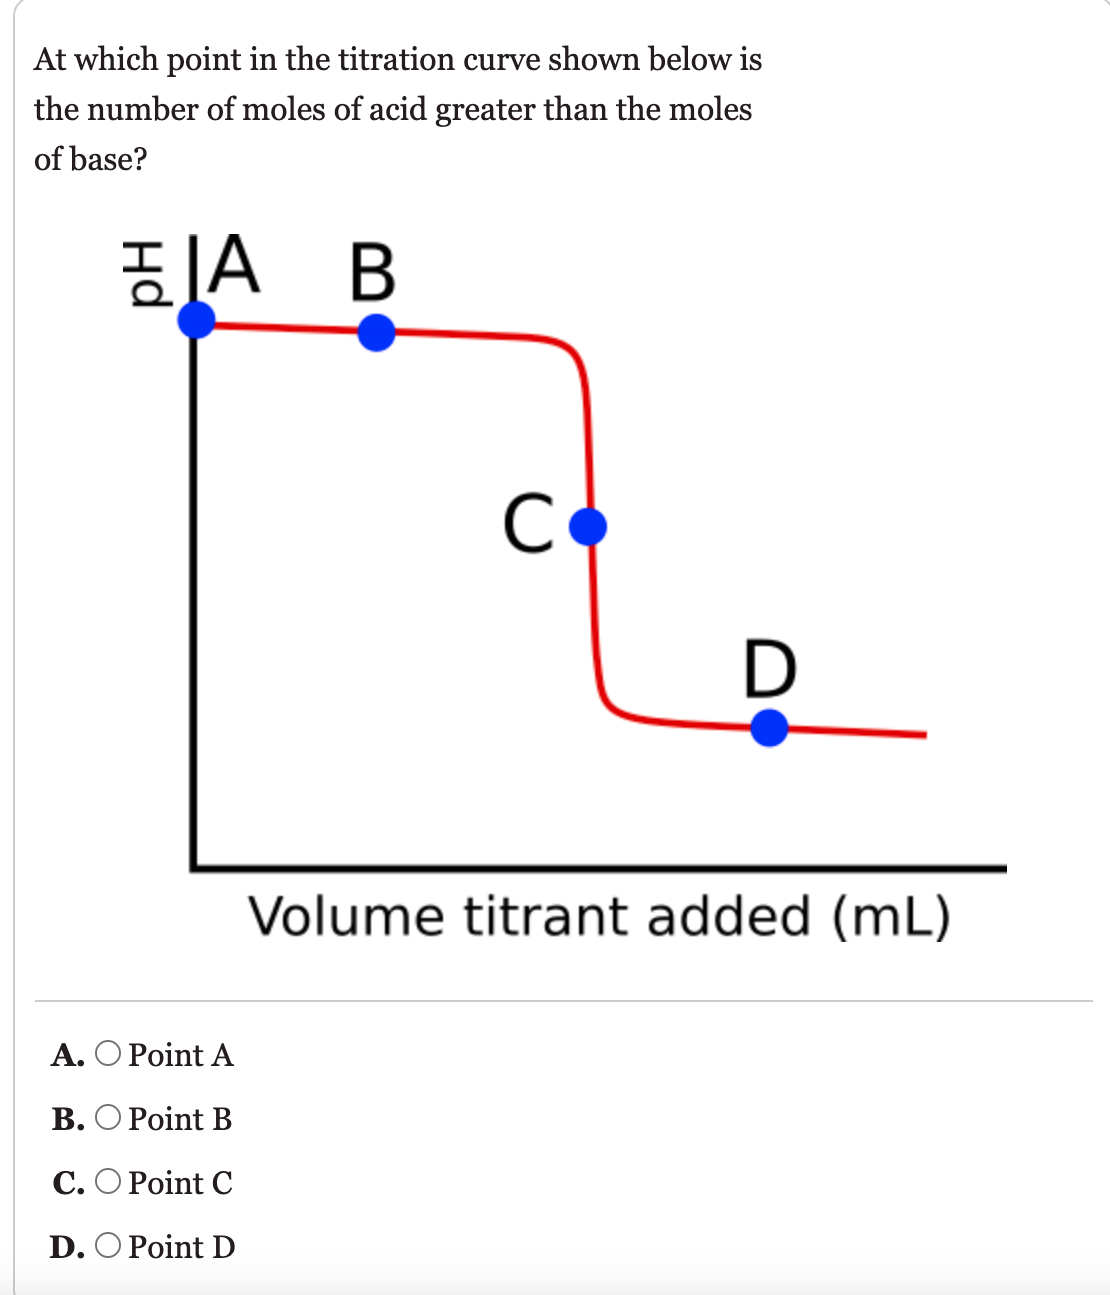 At which point in the titration curve shown below is
the number of moles of acid greater than the moles
of base?
지A B
C
Volume titrant added (mL)
A. O Point A
В. О Рoint B
С. О Рoint C
D. O Point D
